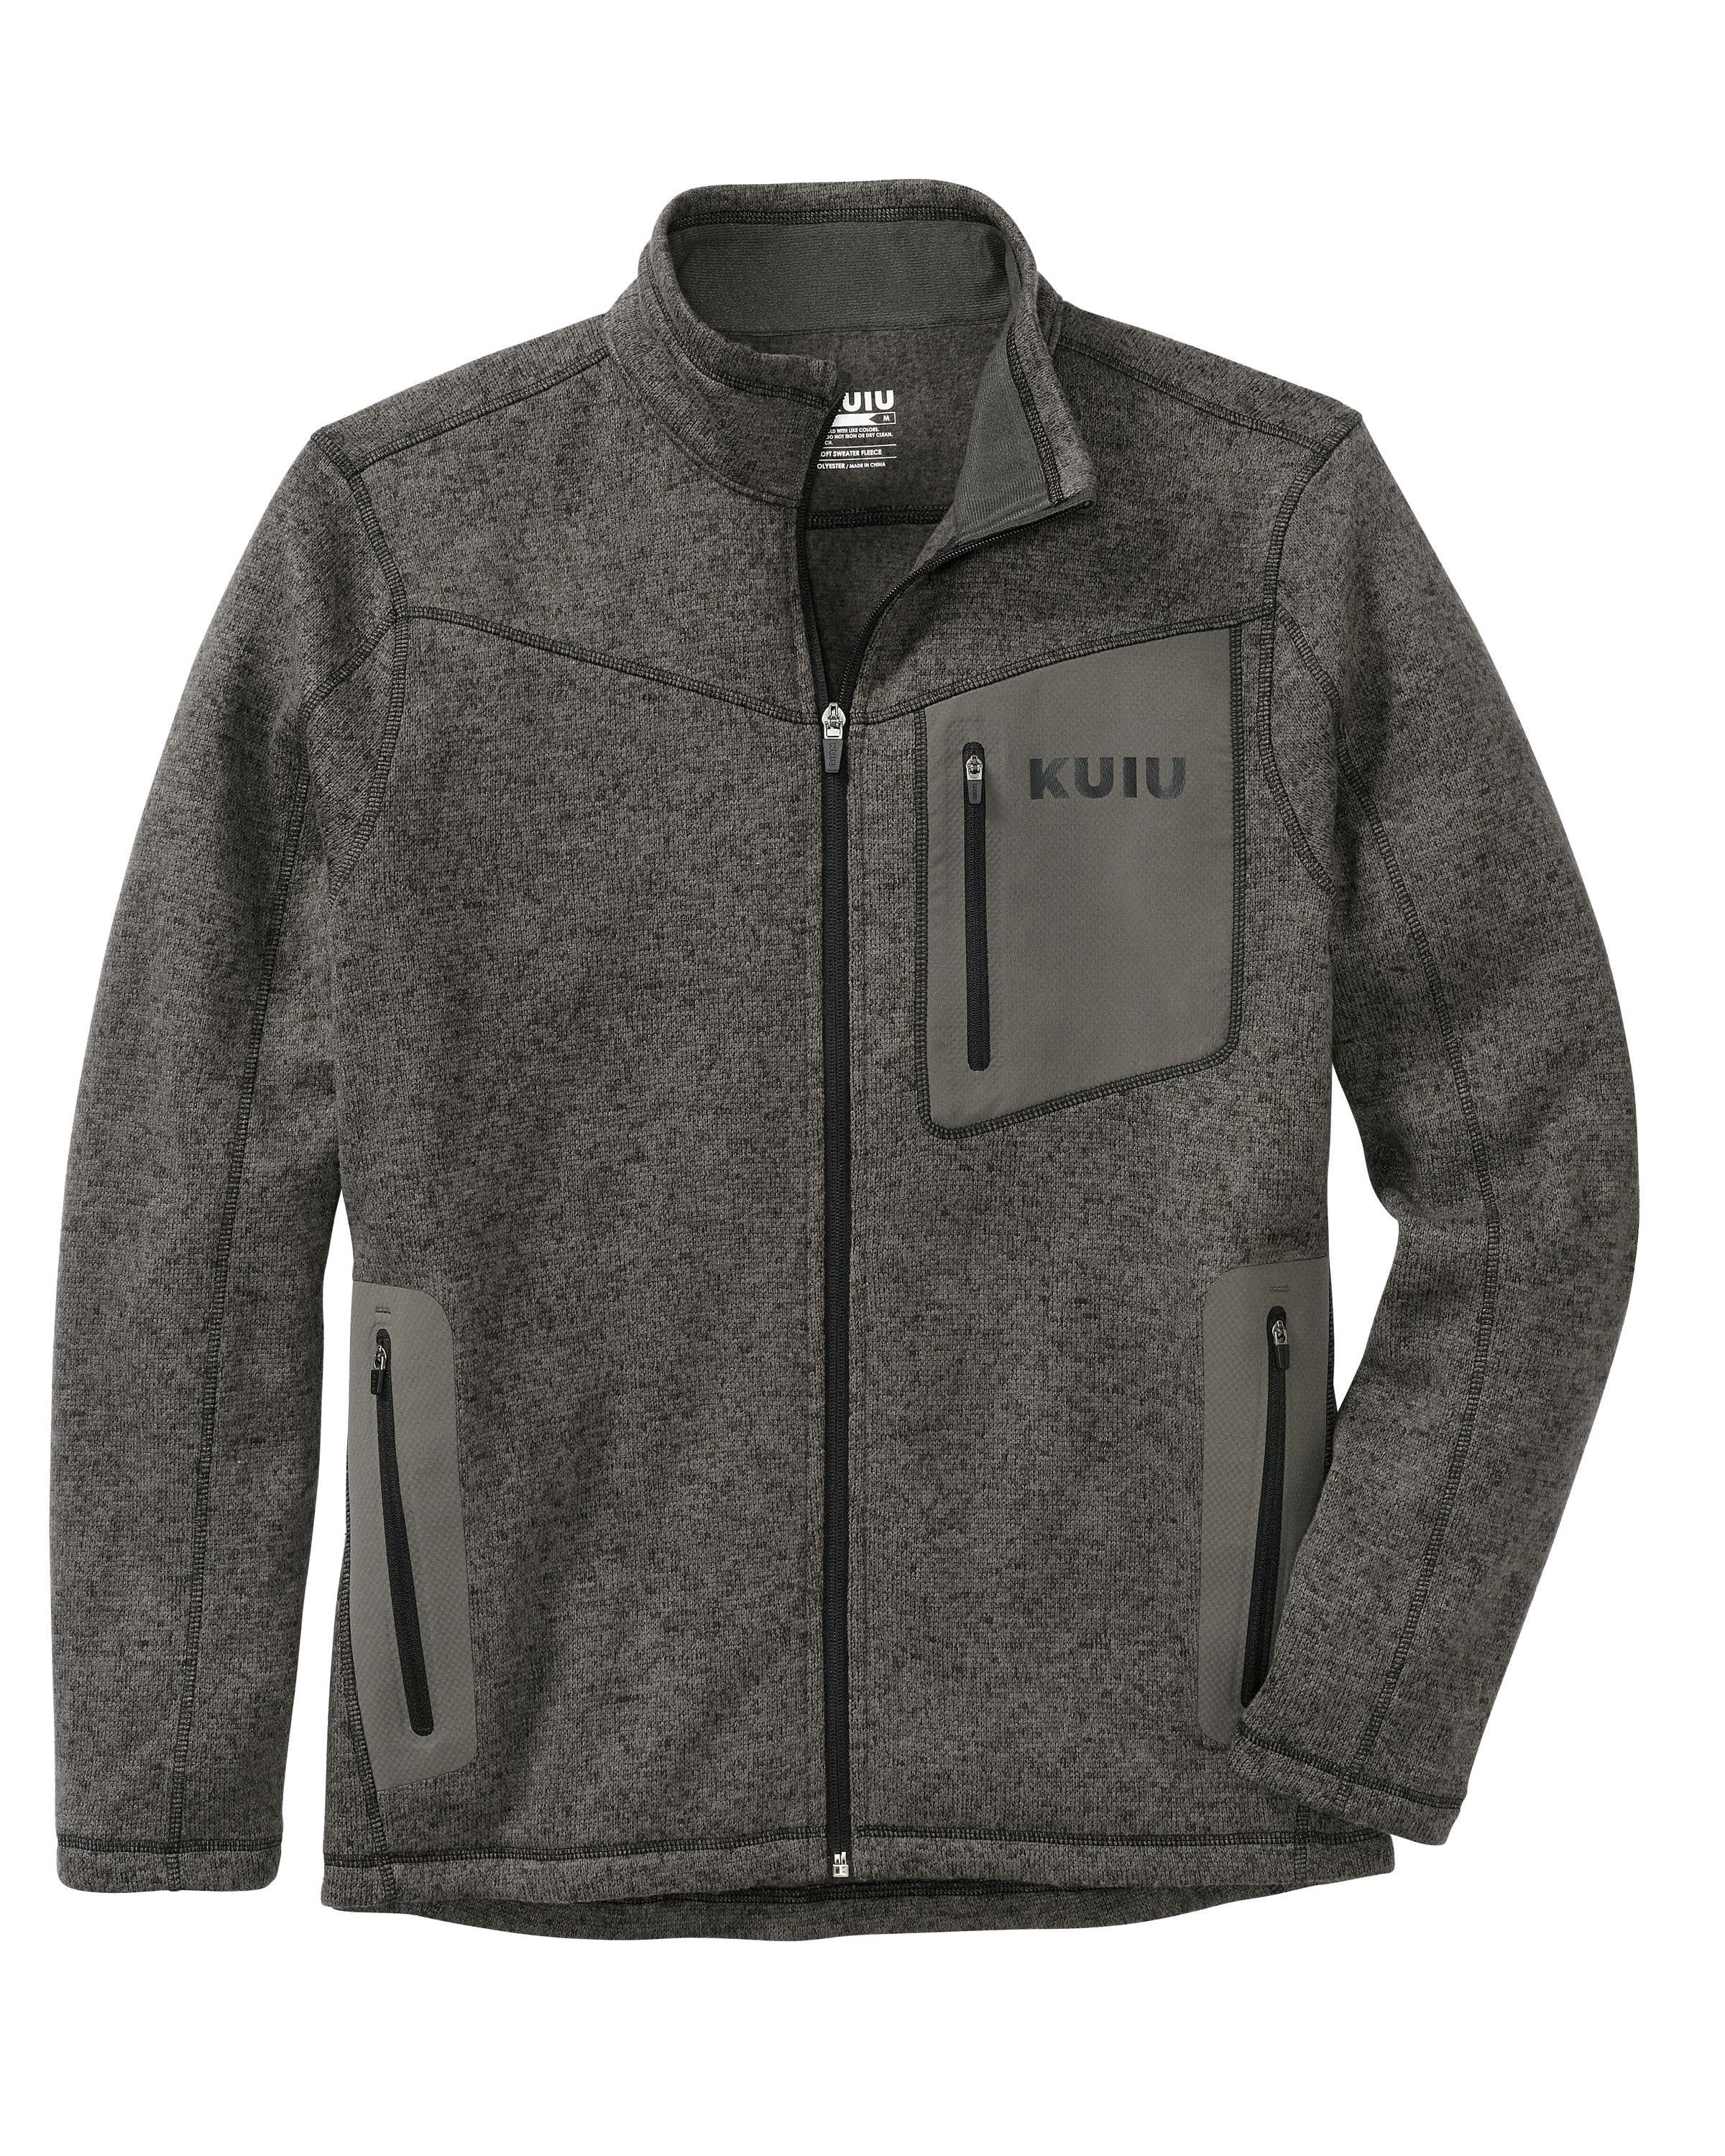 KUIU Outlet Base Camp Full Zip Sweater in Charcoal | Size 3XL